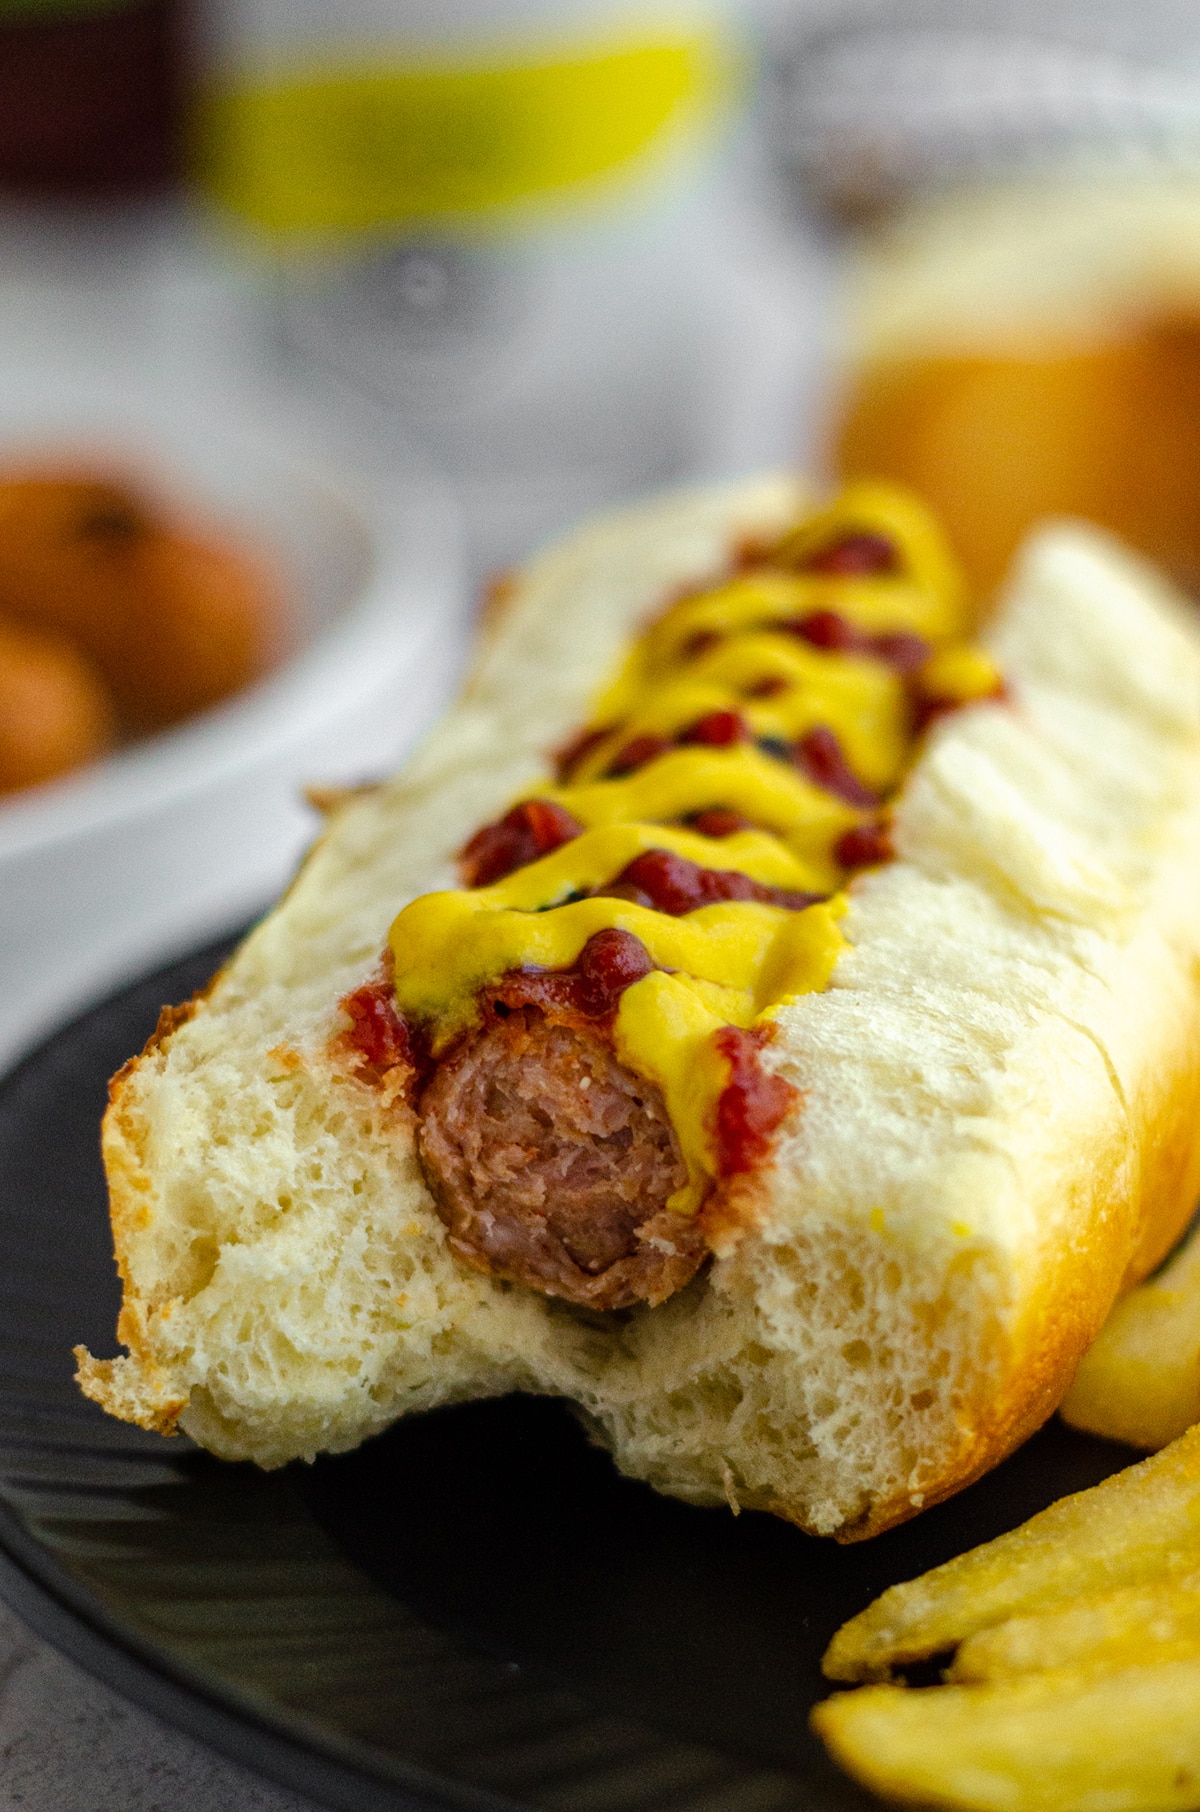 hot dog in a homemade hot dog bun with ketchup and mustard and a bite taken out of it